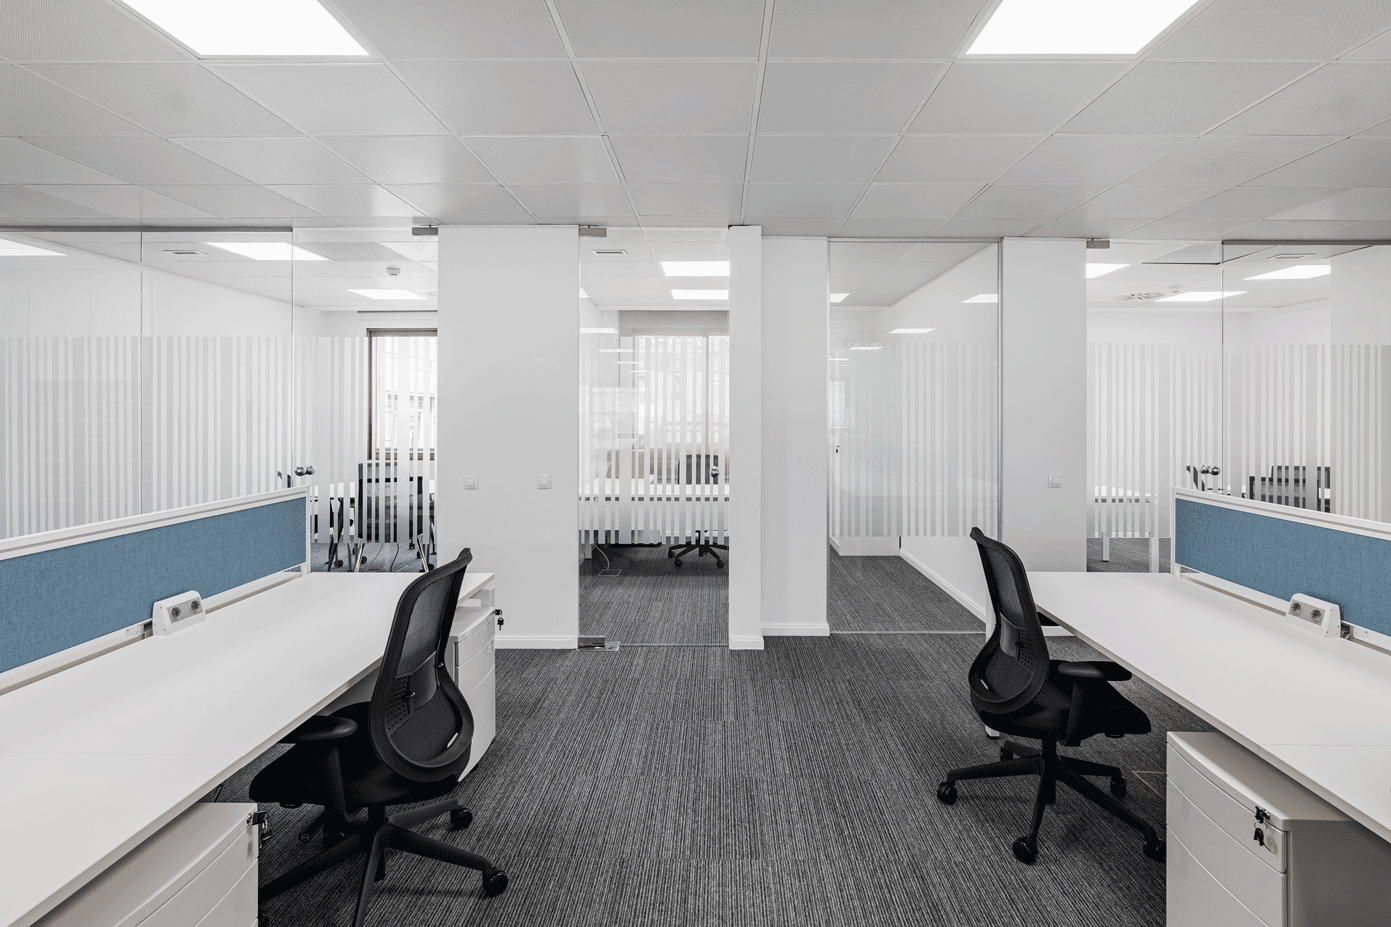 An expansive, contemporary office space featuring grey patterned carpets, multiple white desks, and a calm, monochromatic color scheme.